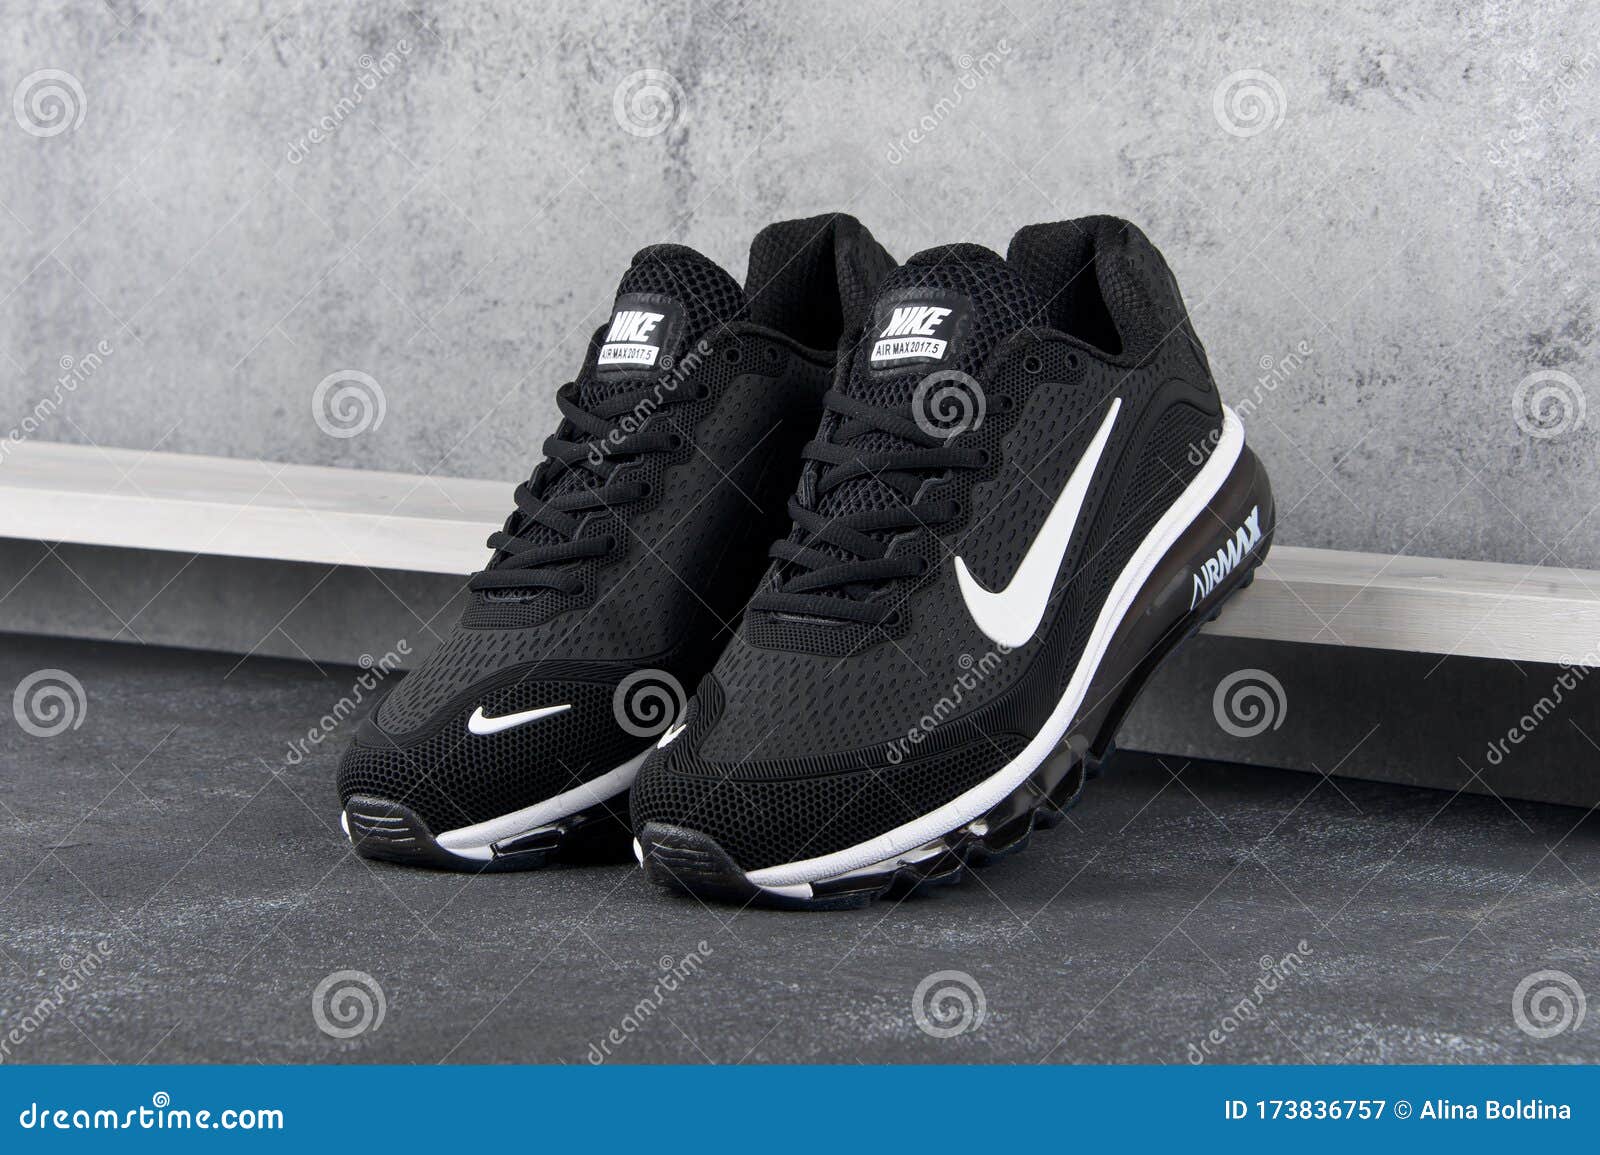 Subir Predecesor maquillaje Black Nike Air Max 2017 Running Shoes, Sneakers Shot on Grey Abstract  Background. Krasnoyarsk, Russia - May 12, 2017 Editorial Photography -  Image of editorial, back: 173836757